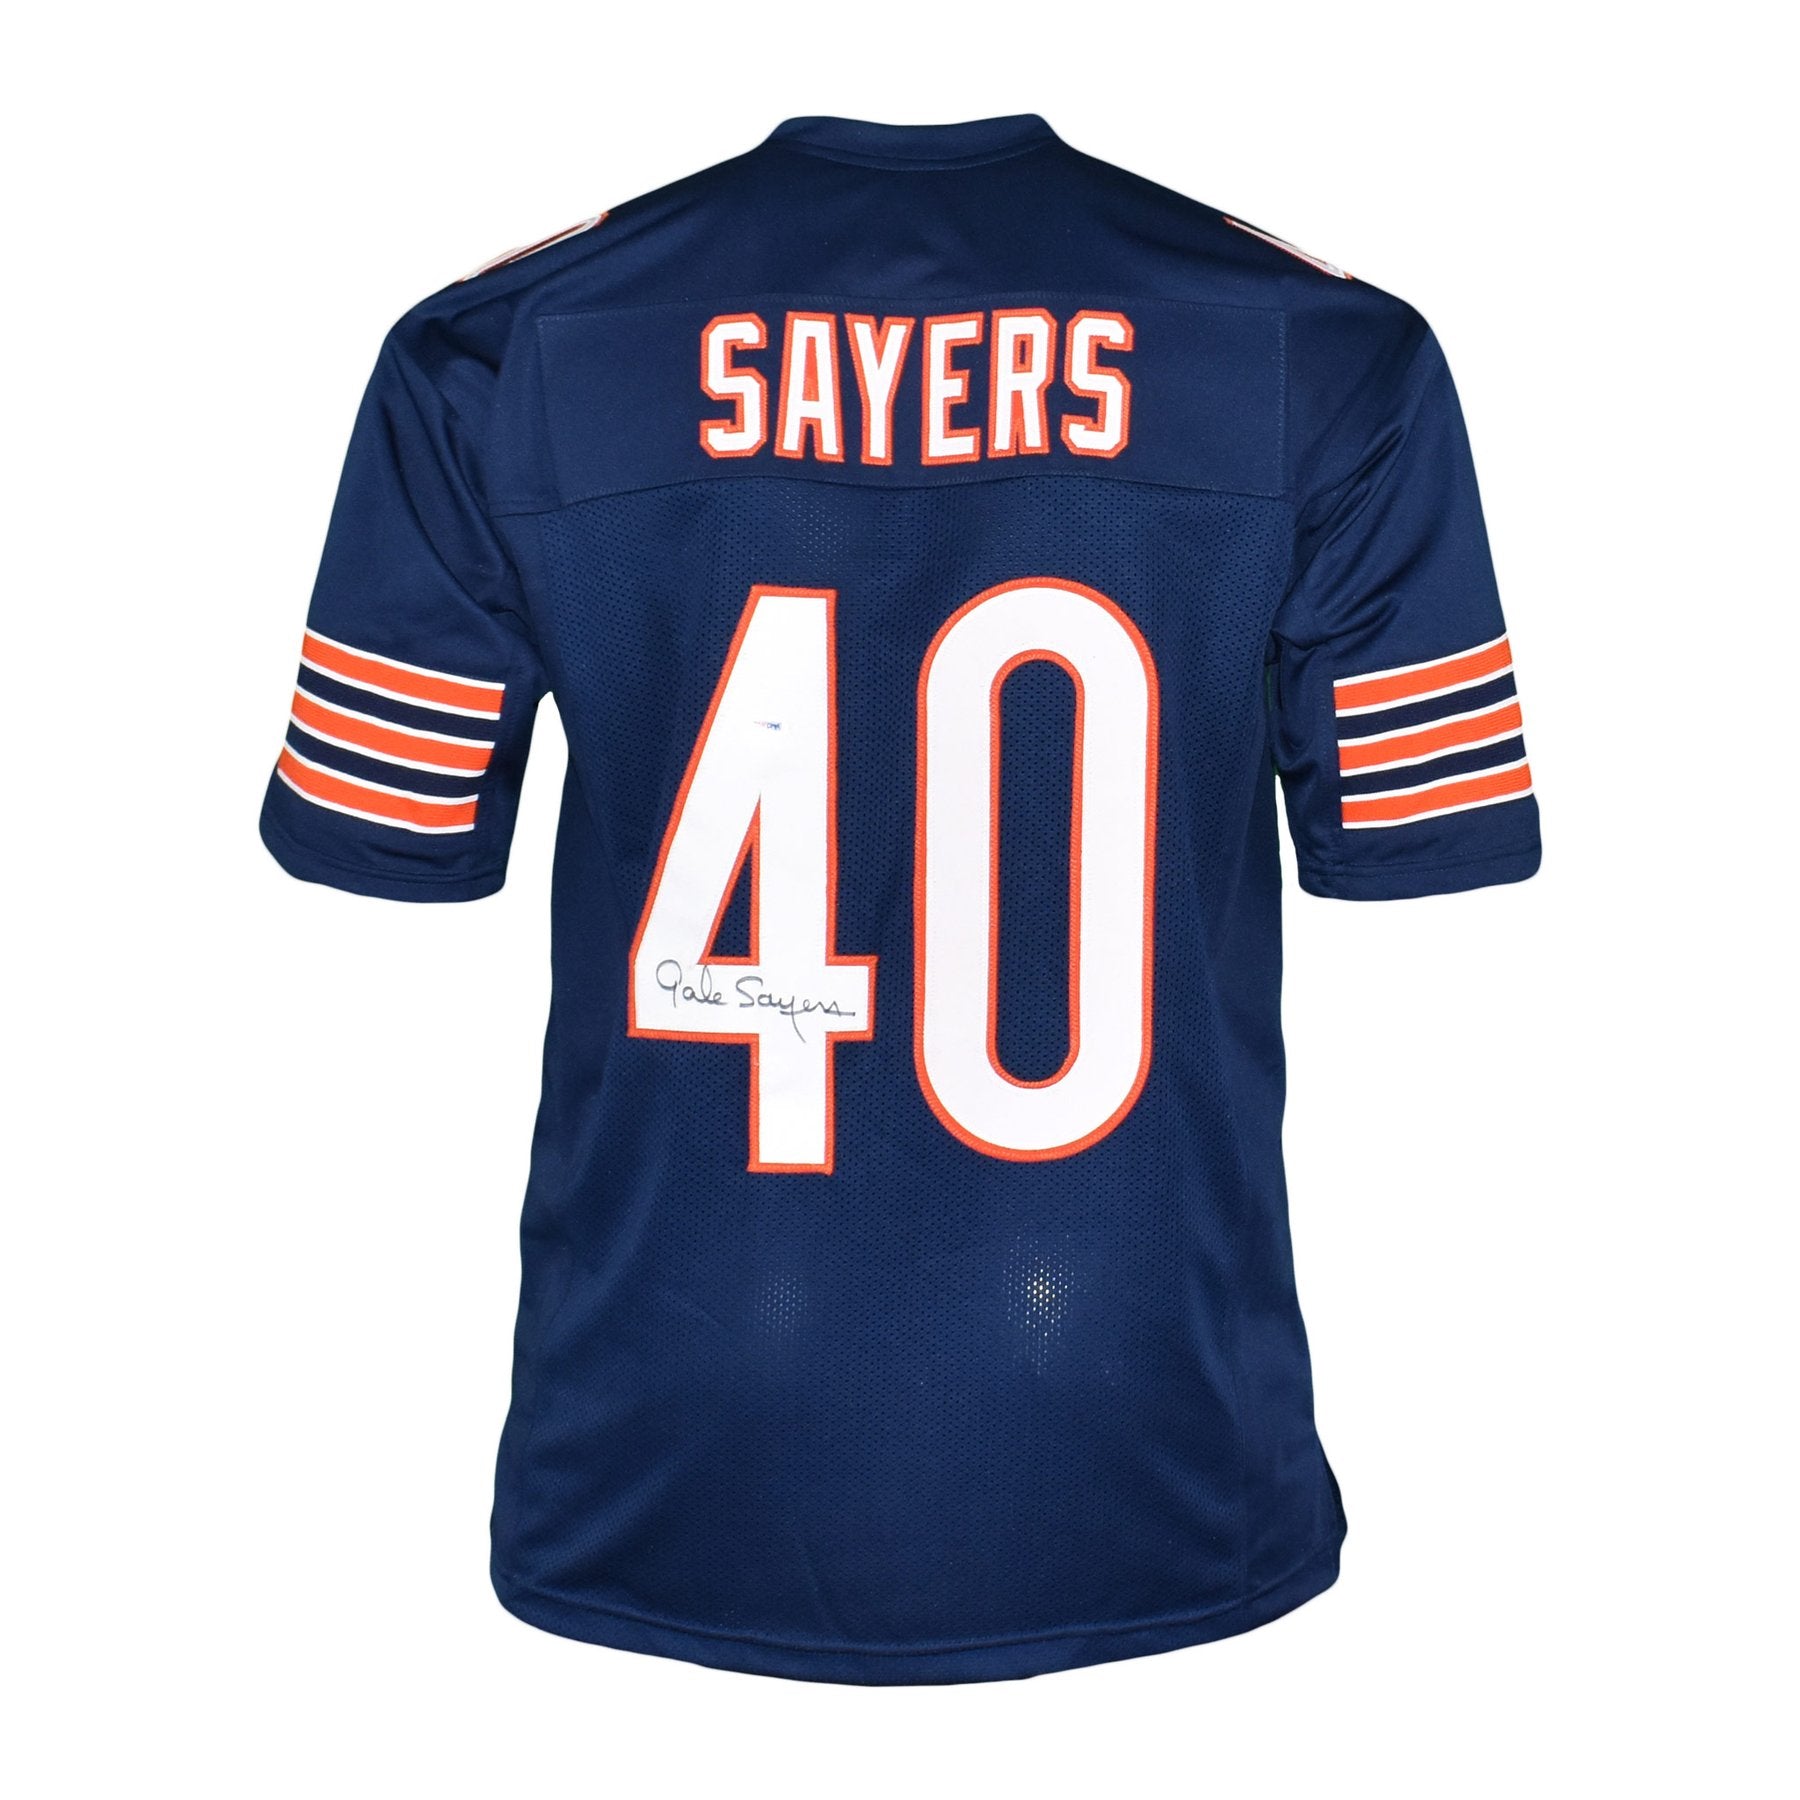 Gale Sayers Autographed Chicago Bears Football NFL Jersey PSA